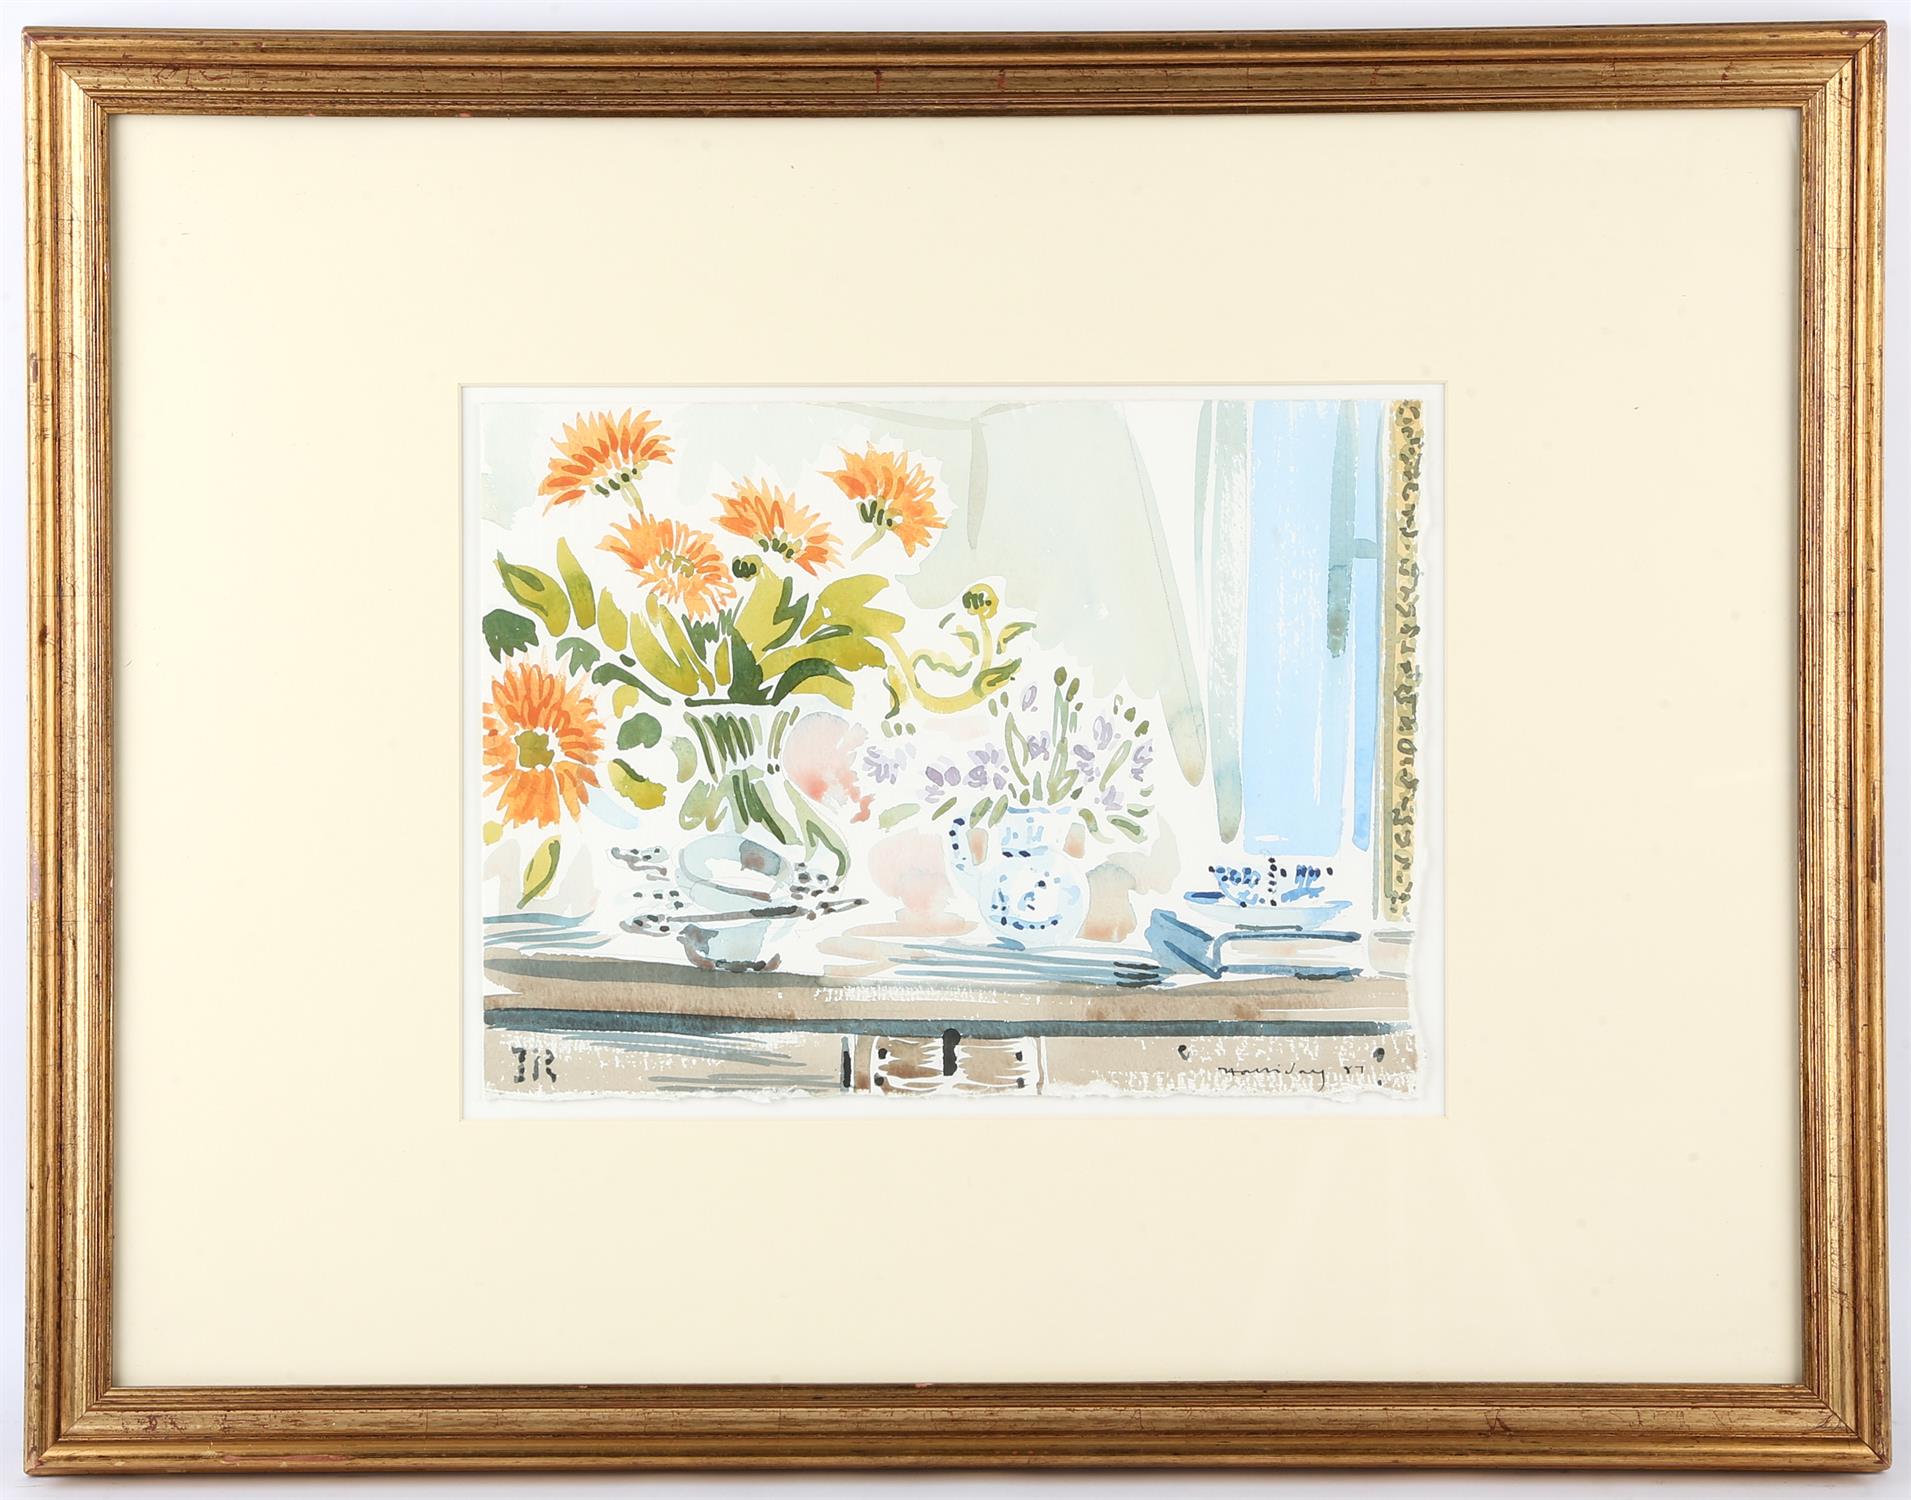 Alan Halliday (British b.1952), Marigolds against a mirror, watercolour, signed and dated '87 lower - Image 2 of 4